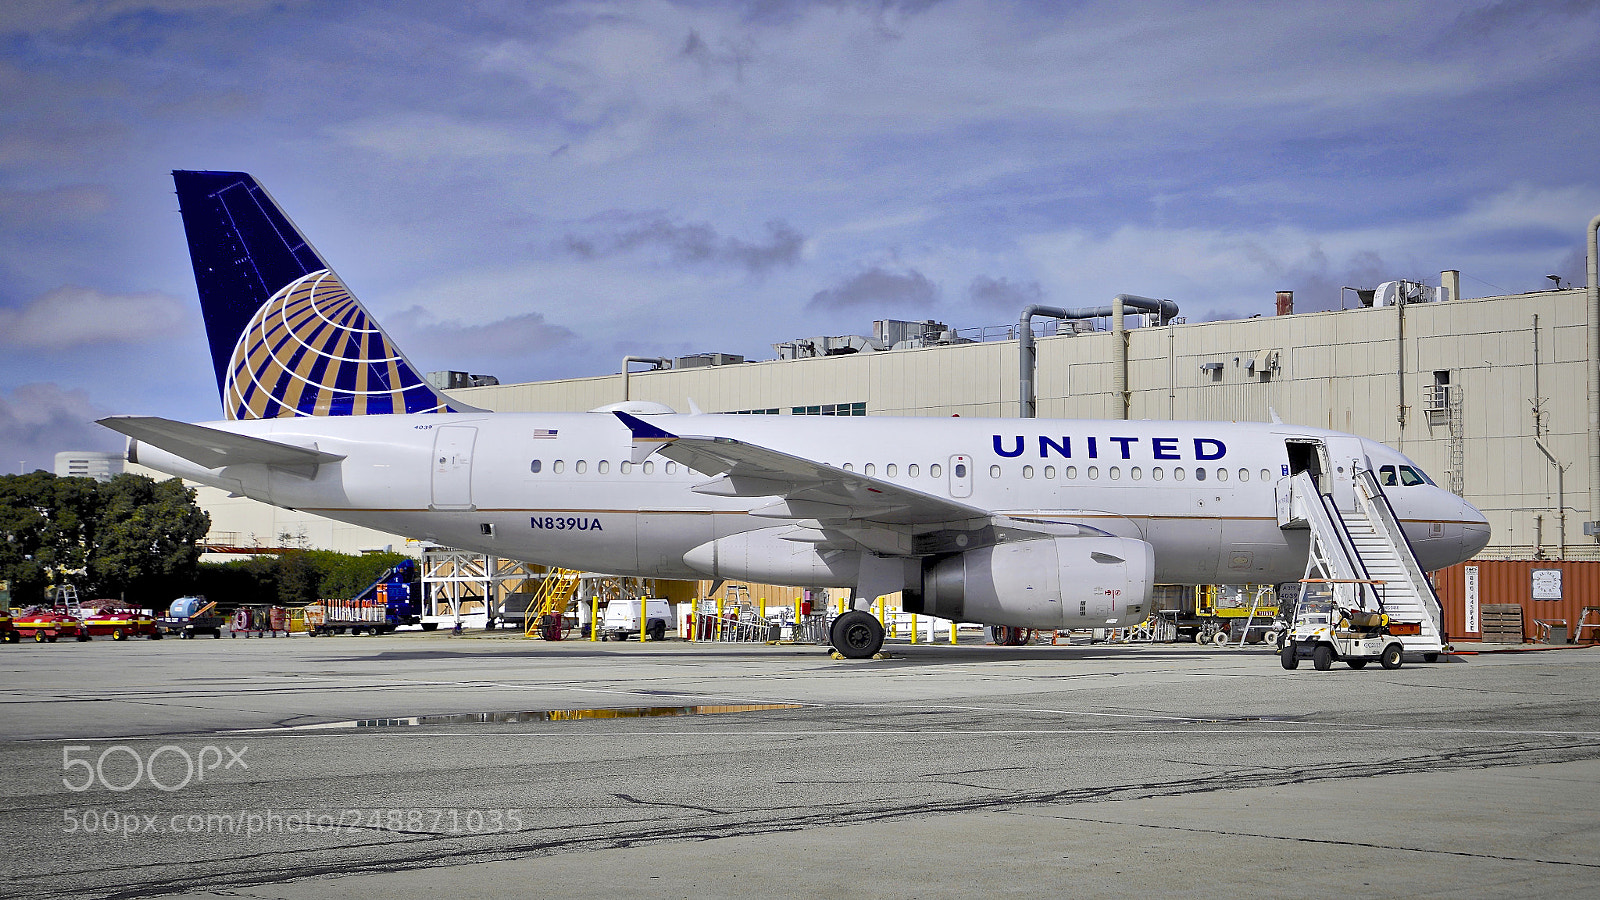 Sony a7R III sample photo. United airlines 2001 airbus photography